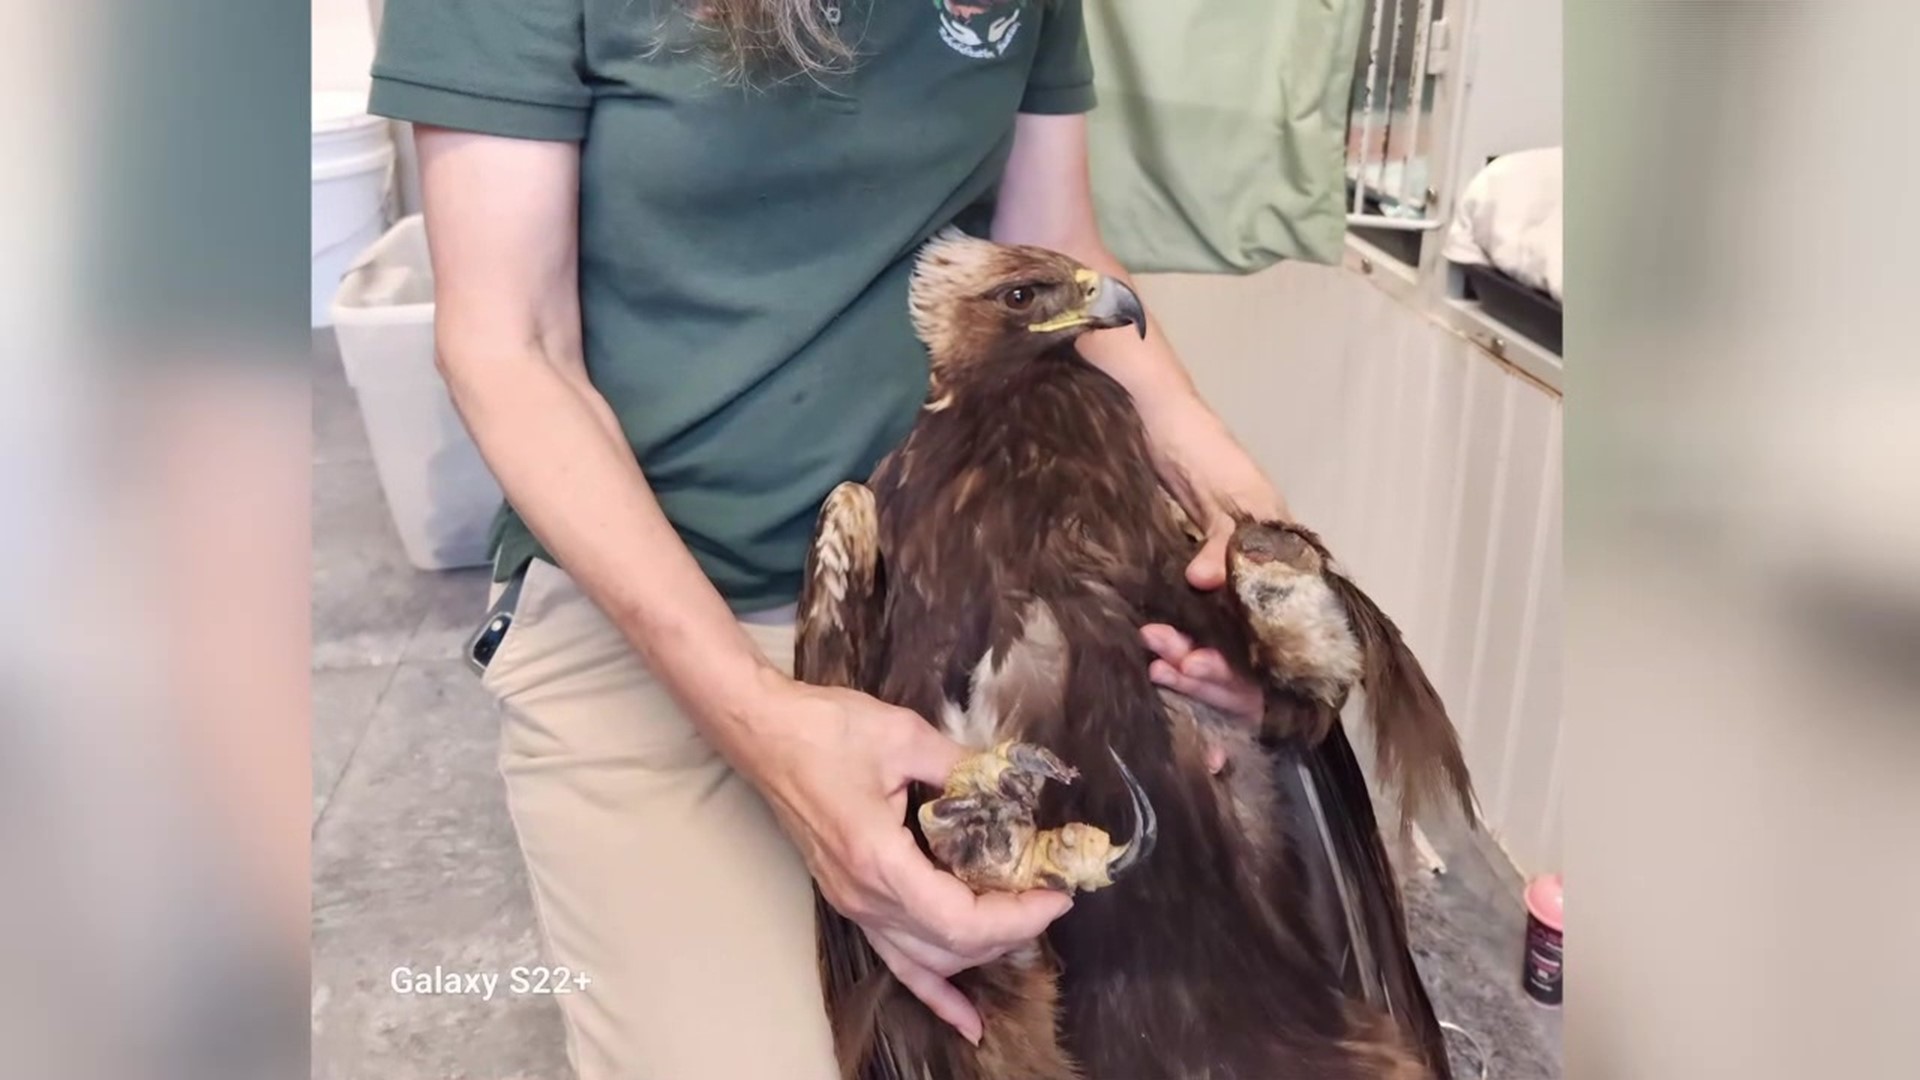 The U.S. Fish and Wildlife Service says it is against regulations to release an eagle with only one foot.